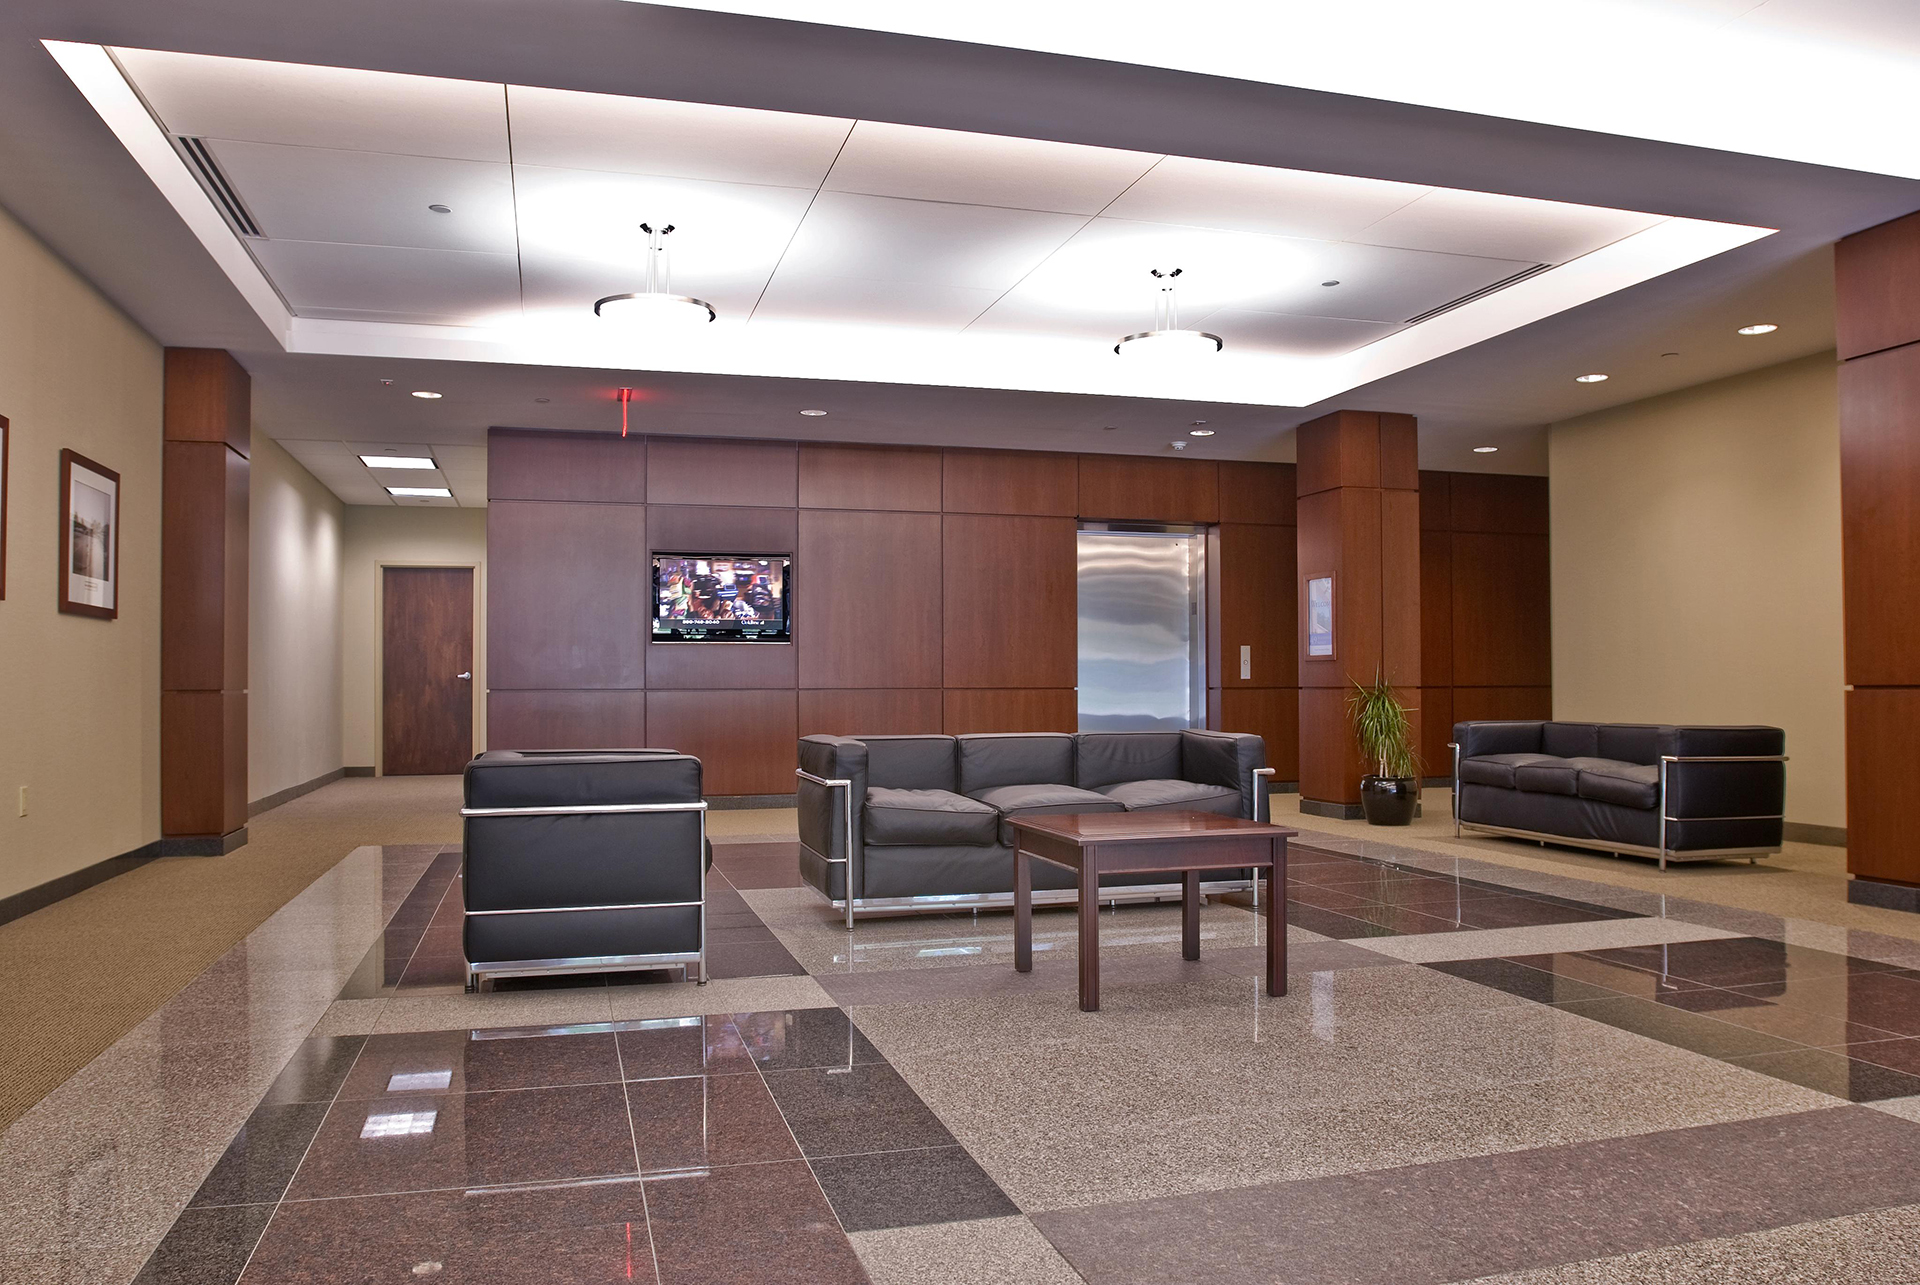 Mountain Lakes Corporate Center Lobby shot from above